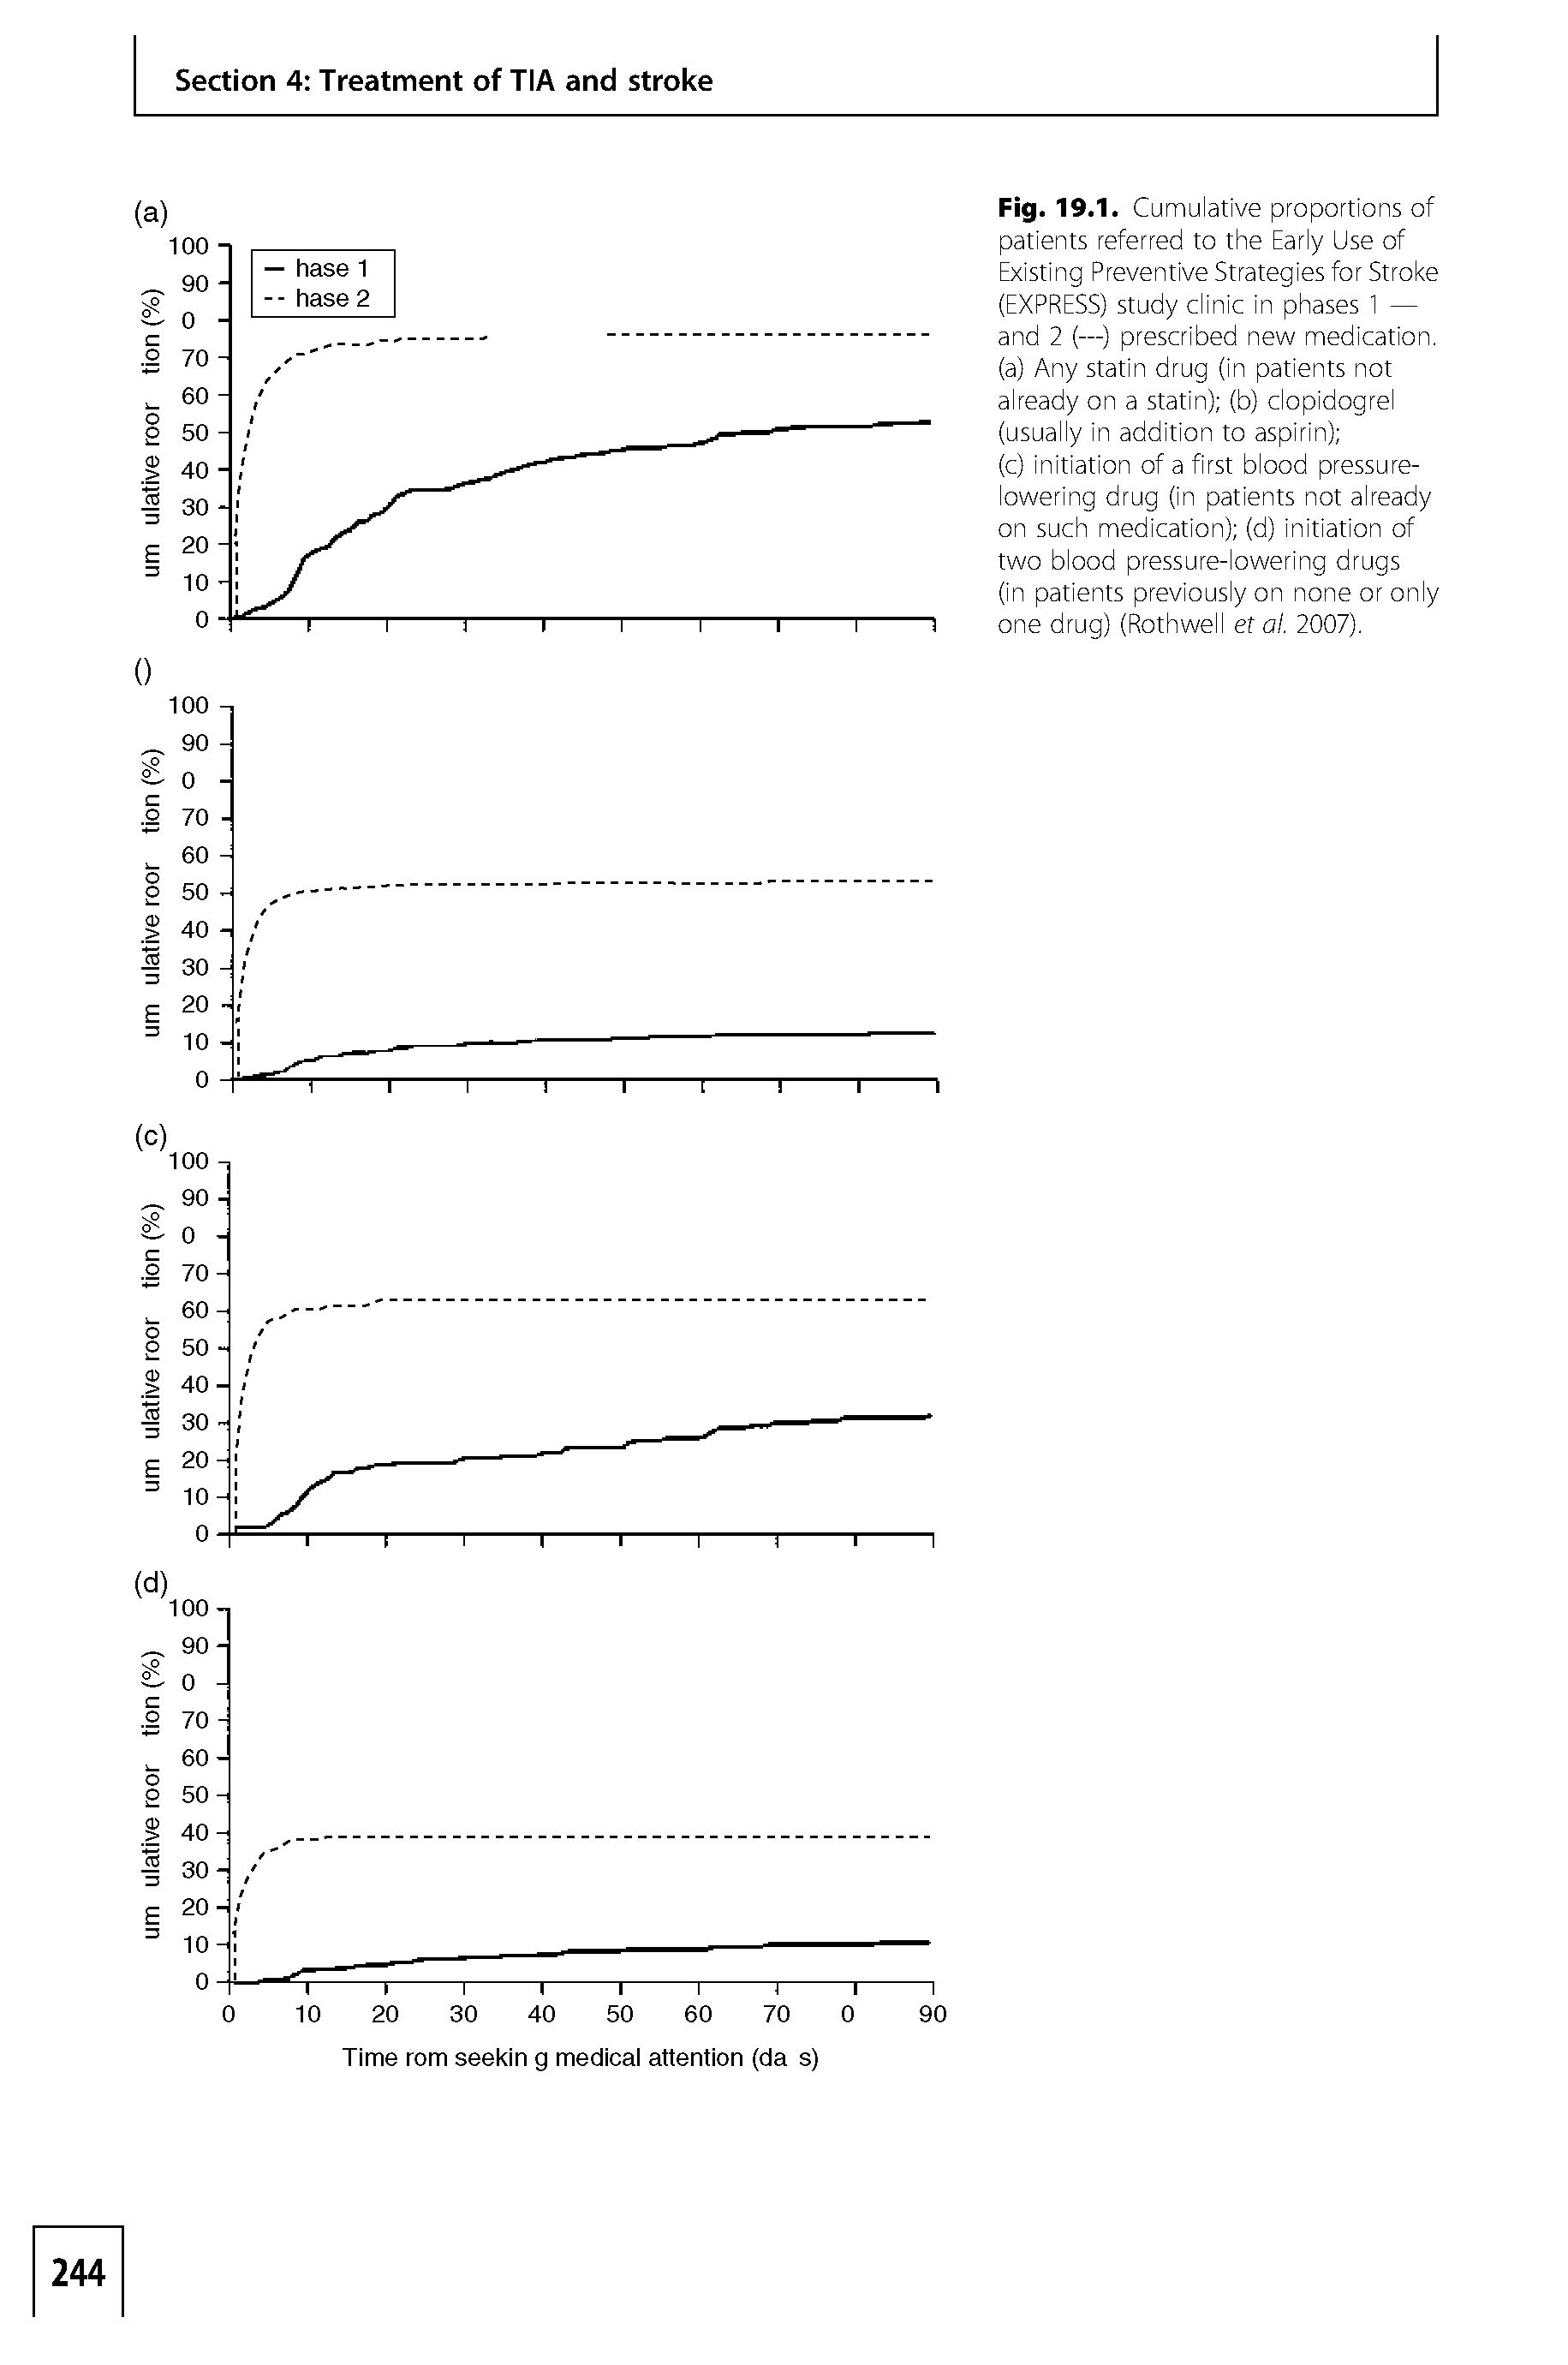 Fig. 19.1. Cumulative proportions of patients referred to the Early Use of Existing Preventive Strategies for Stroke (EXPRESS) study clinic in phases 1 — and 2 (—) prescribed new medication, (a) Any statin drug (in patients not already on a statin) (b) clopidogrel (usually in addition to aspirin) ...